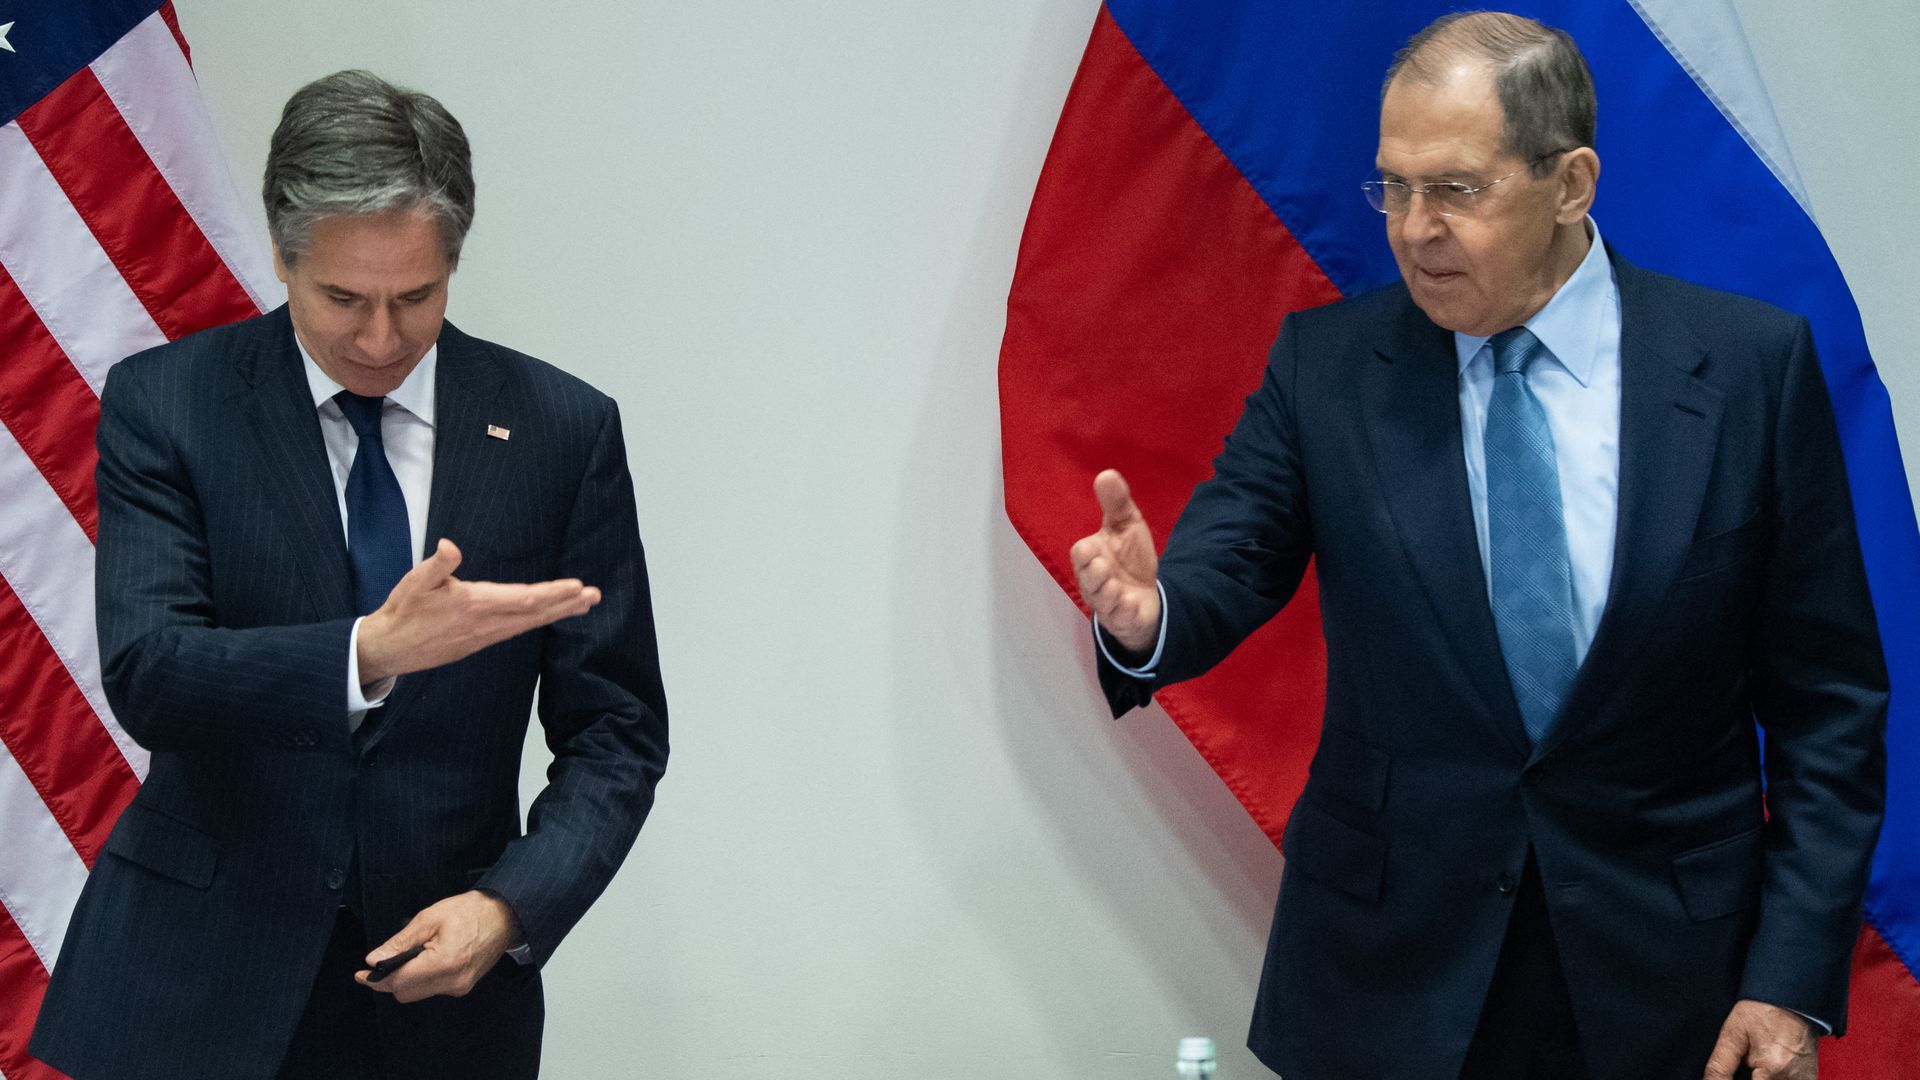 Secretary of State Tony Blinken and Russian Foreign Minister Sergey Lavrov